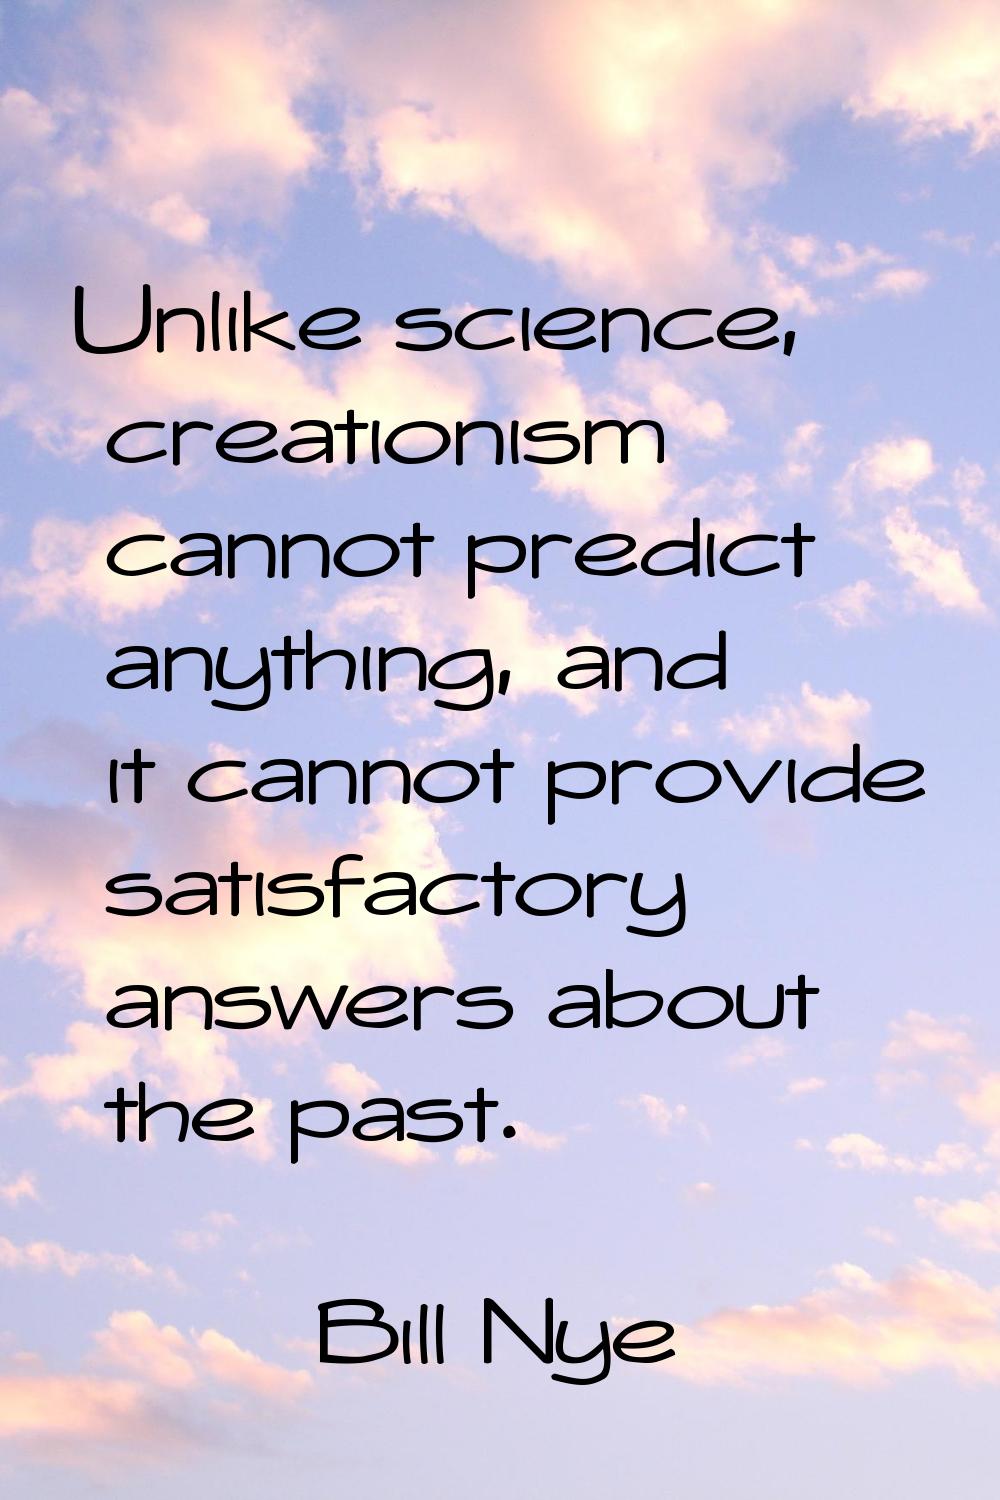 Unlike science, creationism cannot predict anything, and it cannot provide satisfactory answers abo